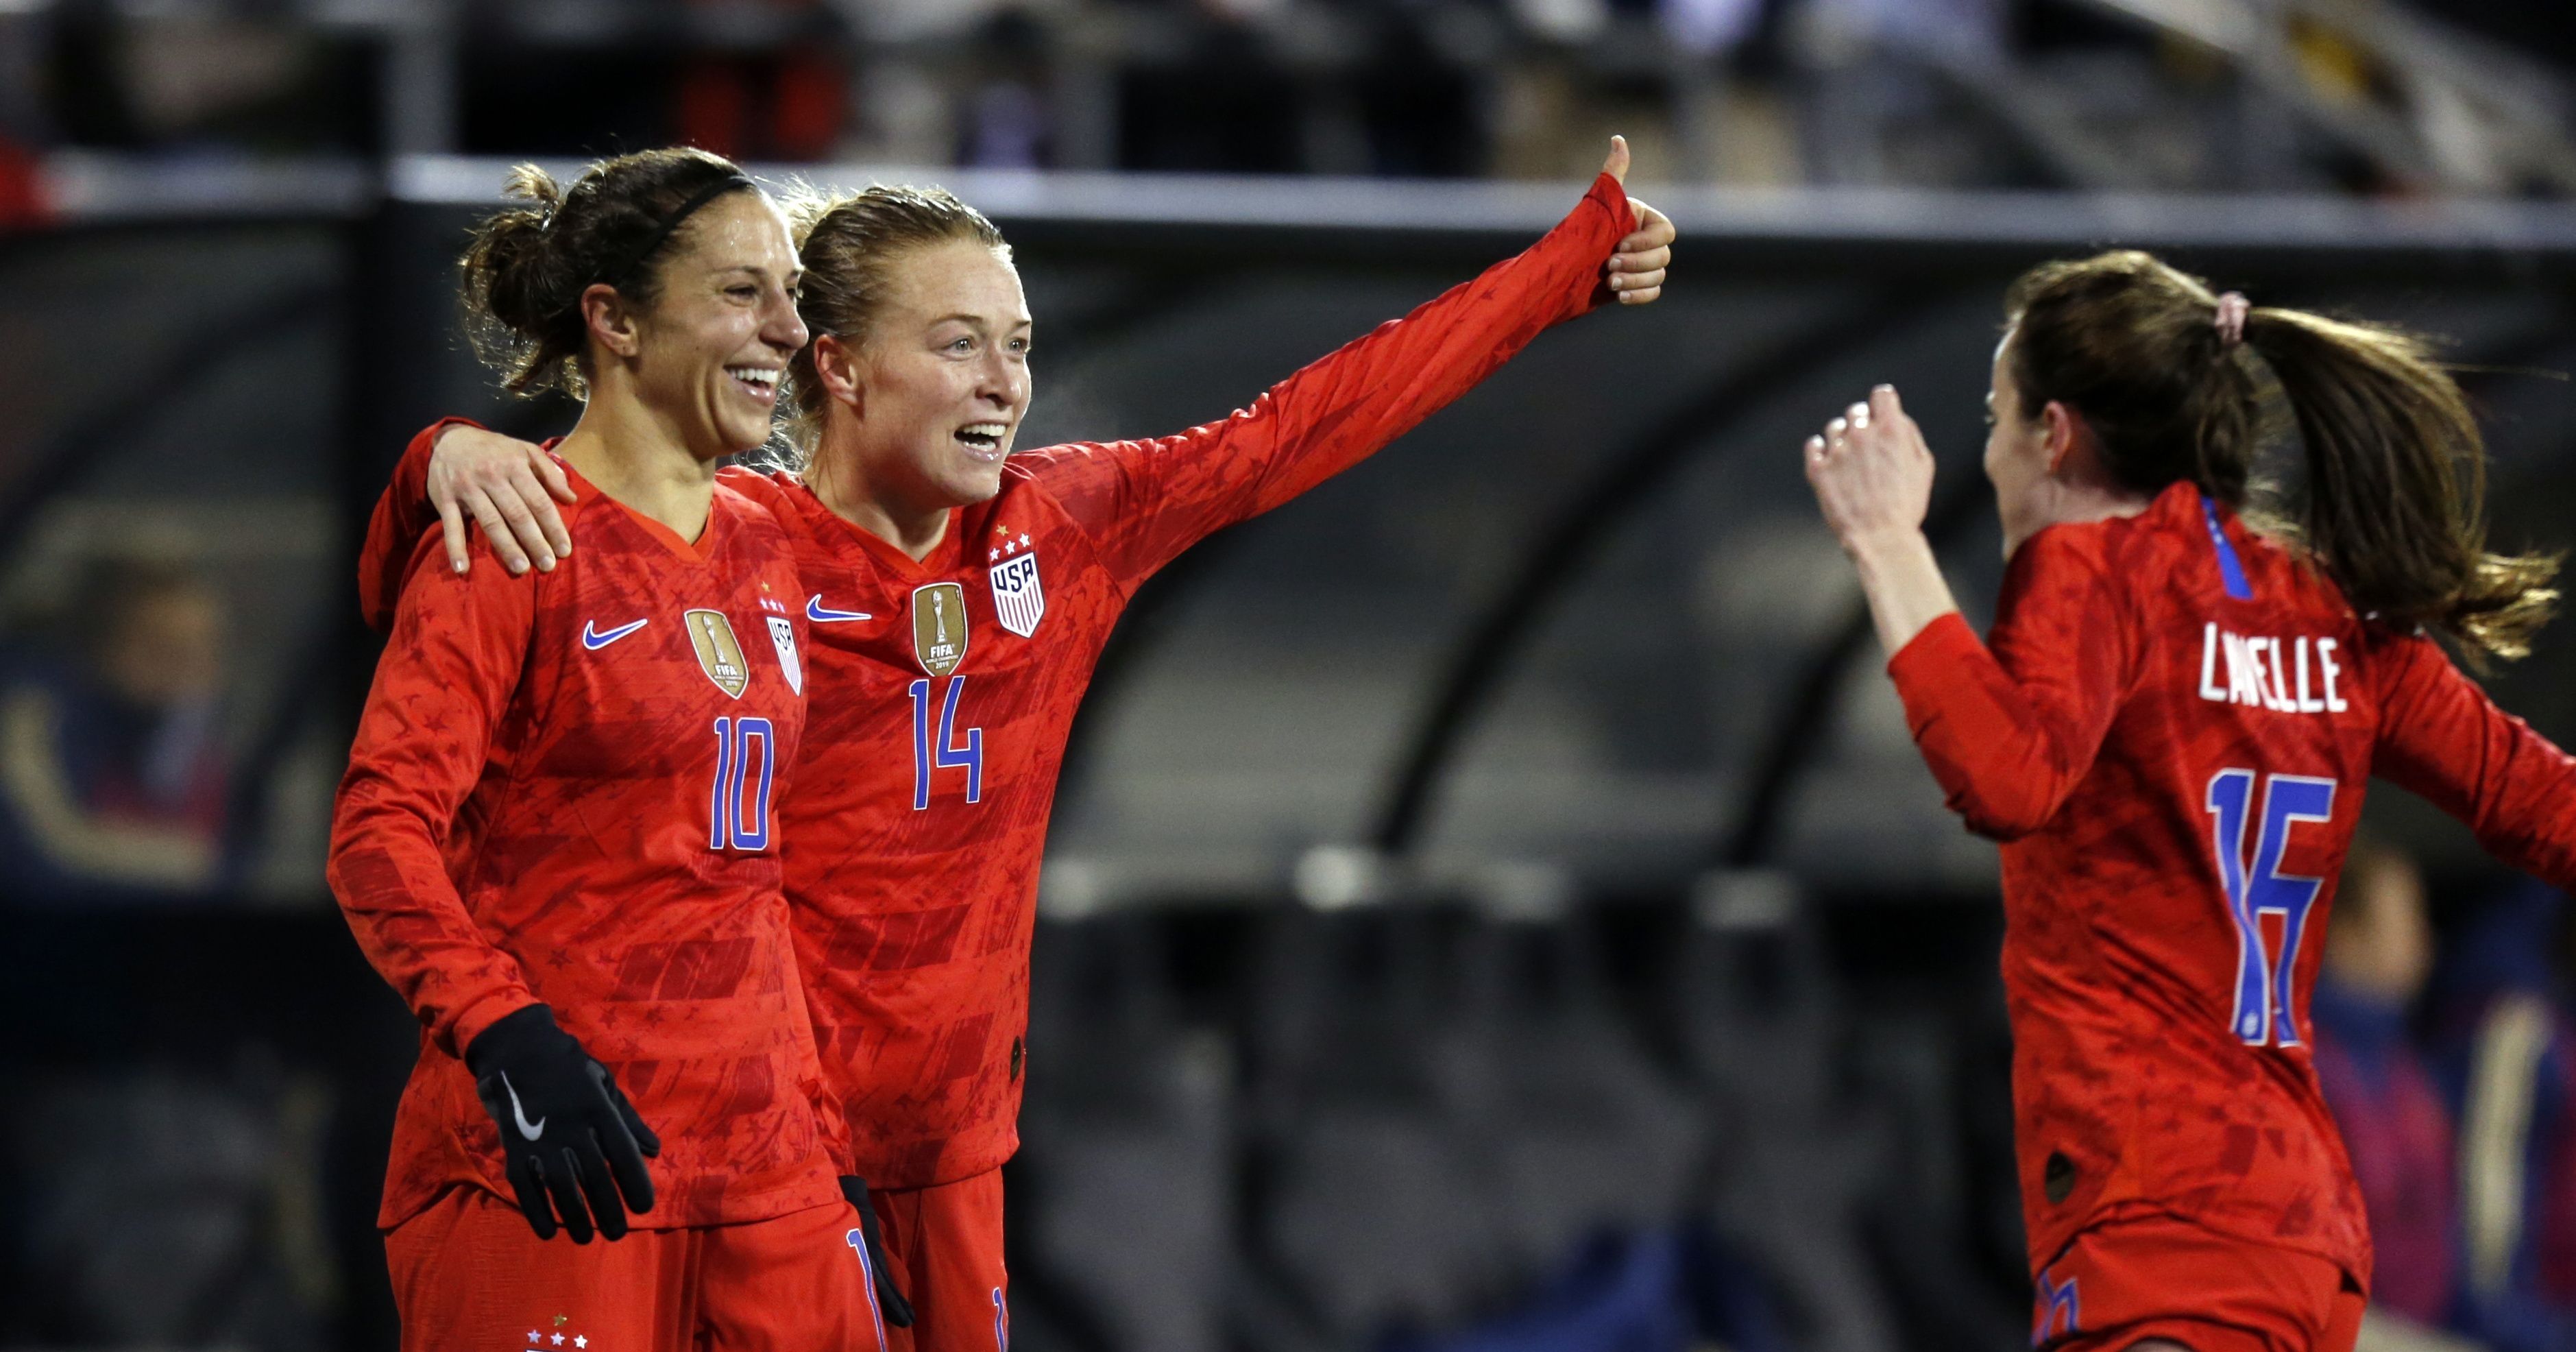 Us Womens Soccer Team Takes Another Step Towards Equal Pay It Can Now Pursue The Lawsuit As A 